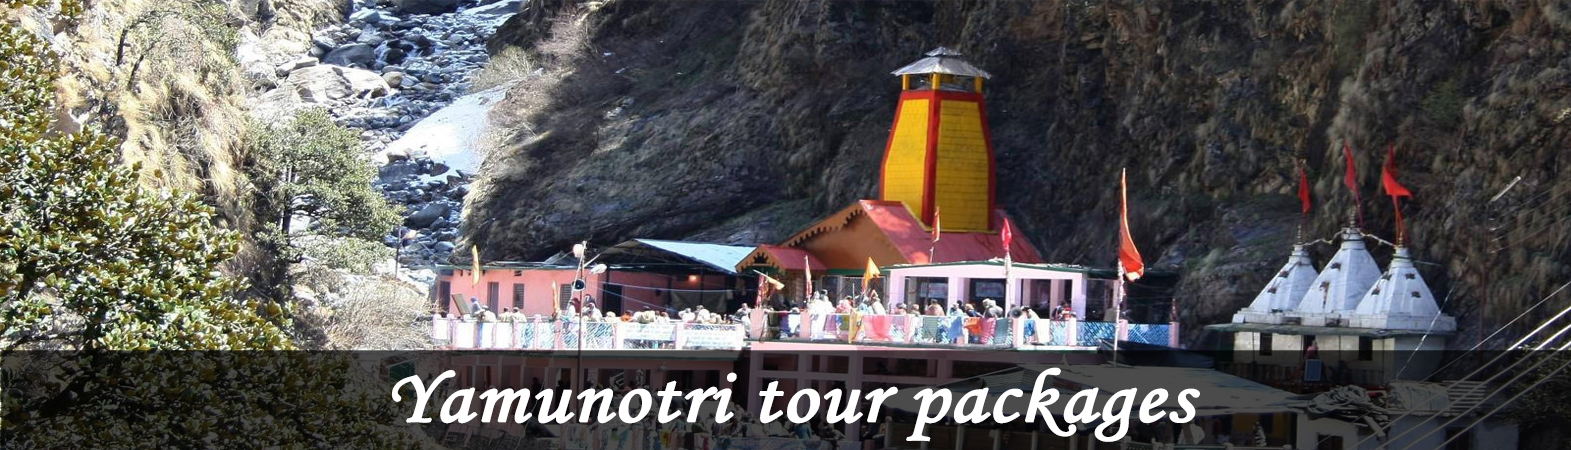 Yamunotri Tour package in Haridwar